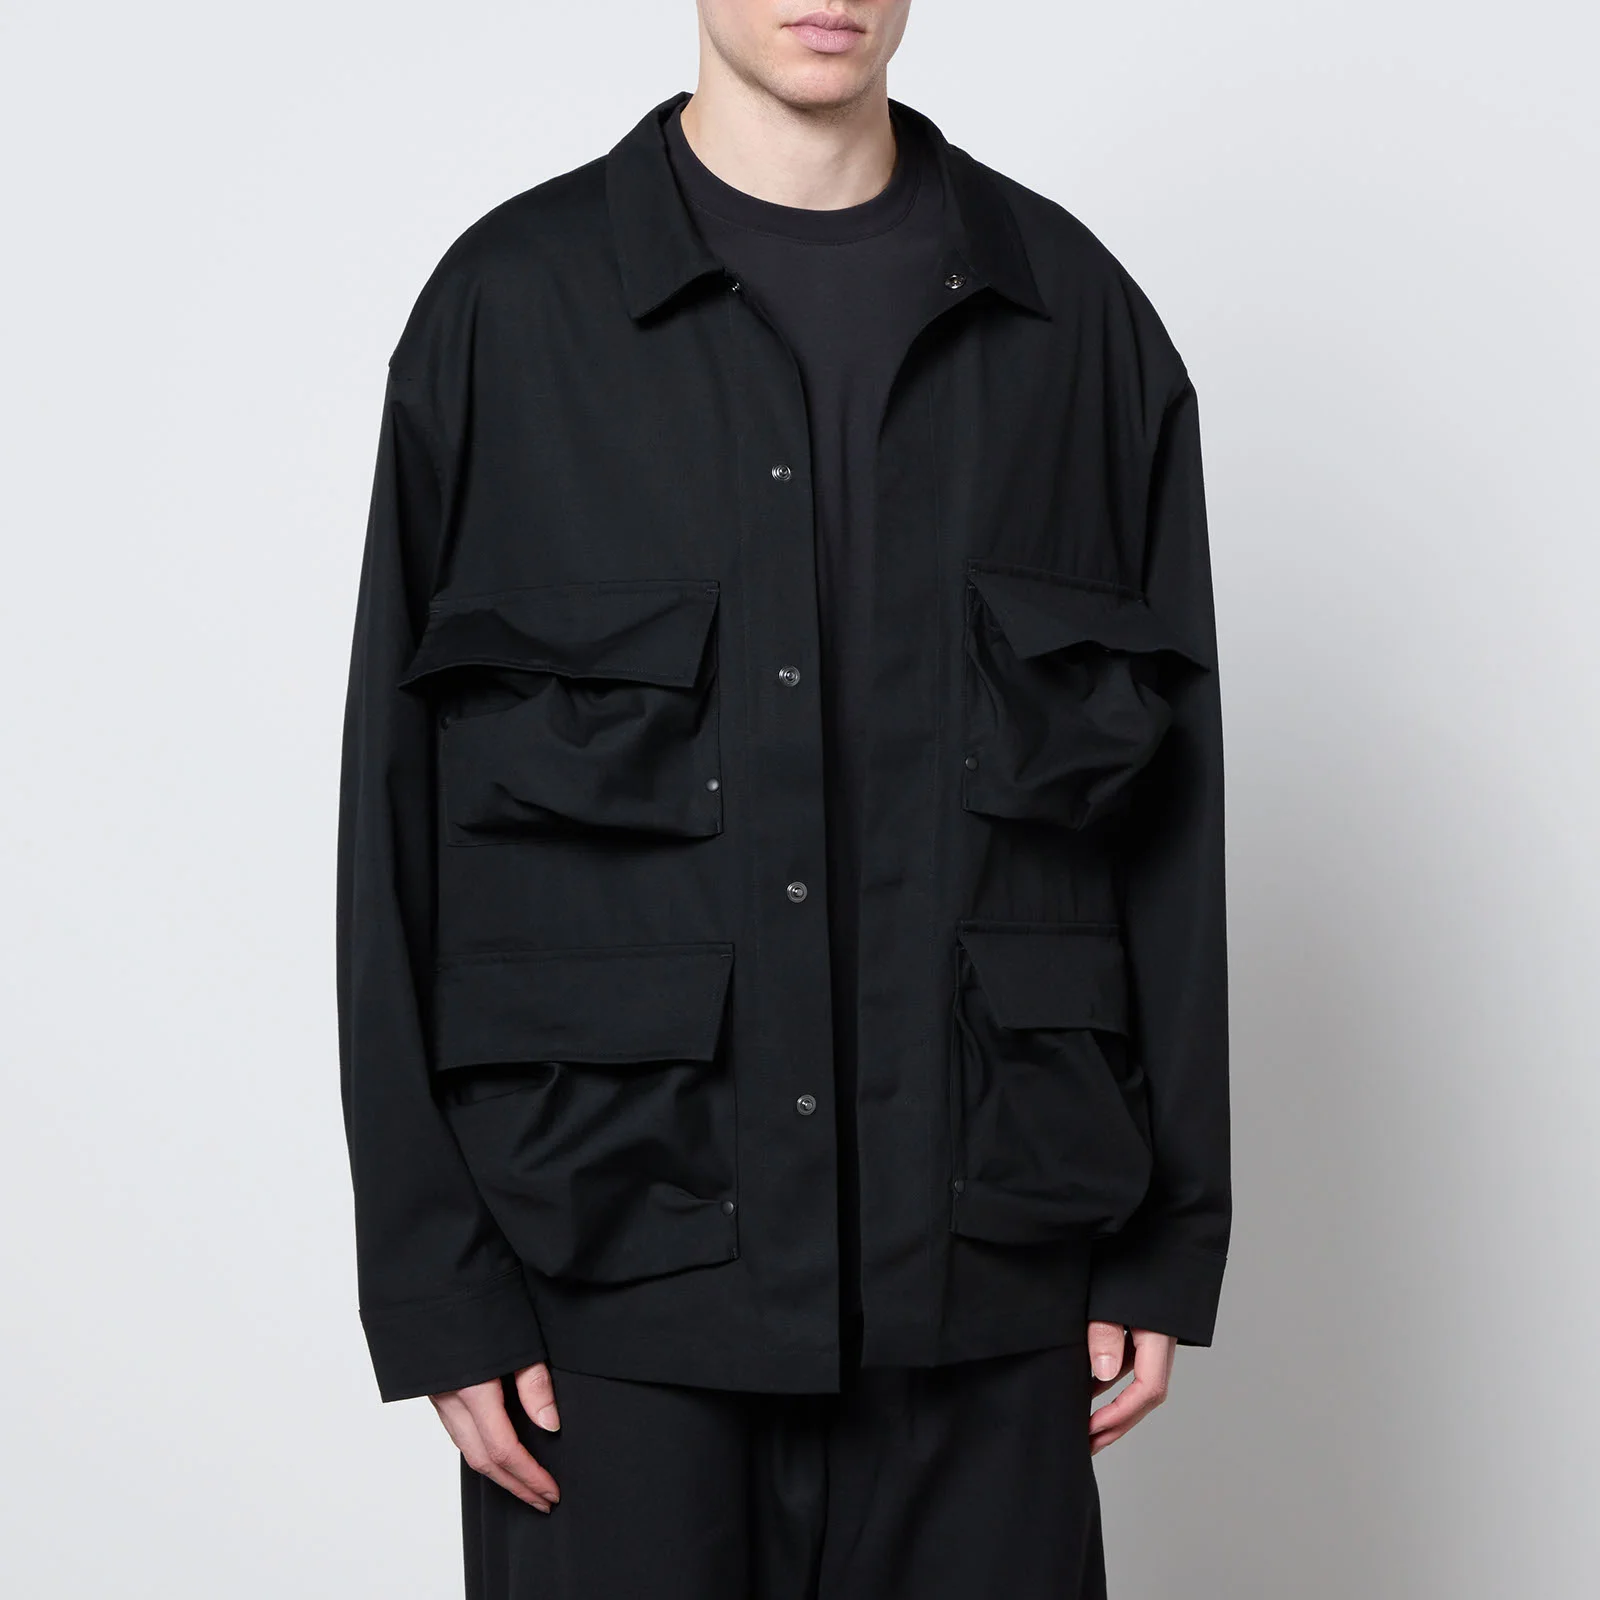 Y-3 Canvas Overshirt - S Image 1